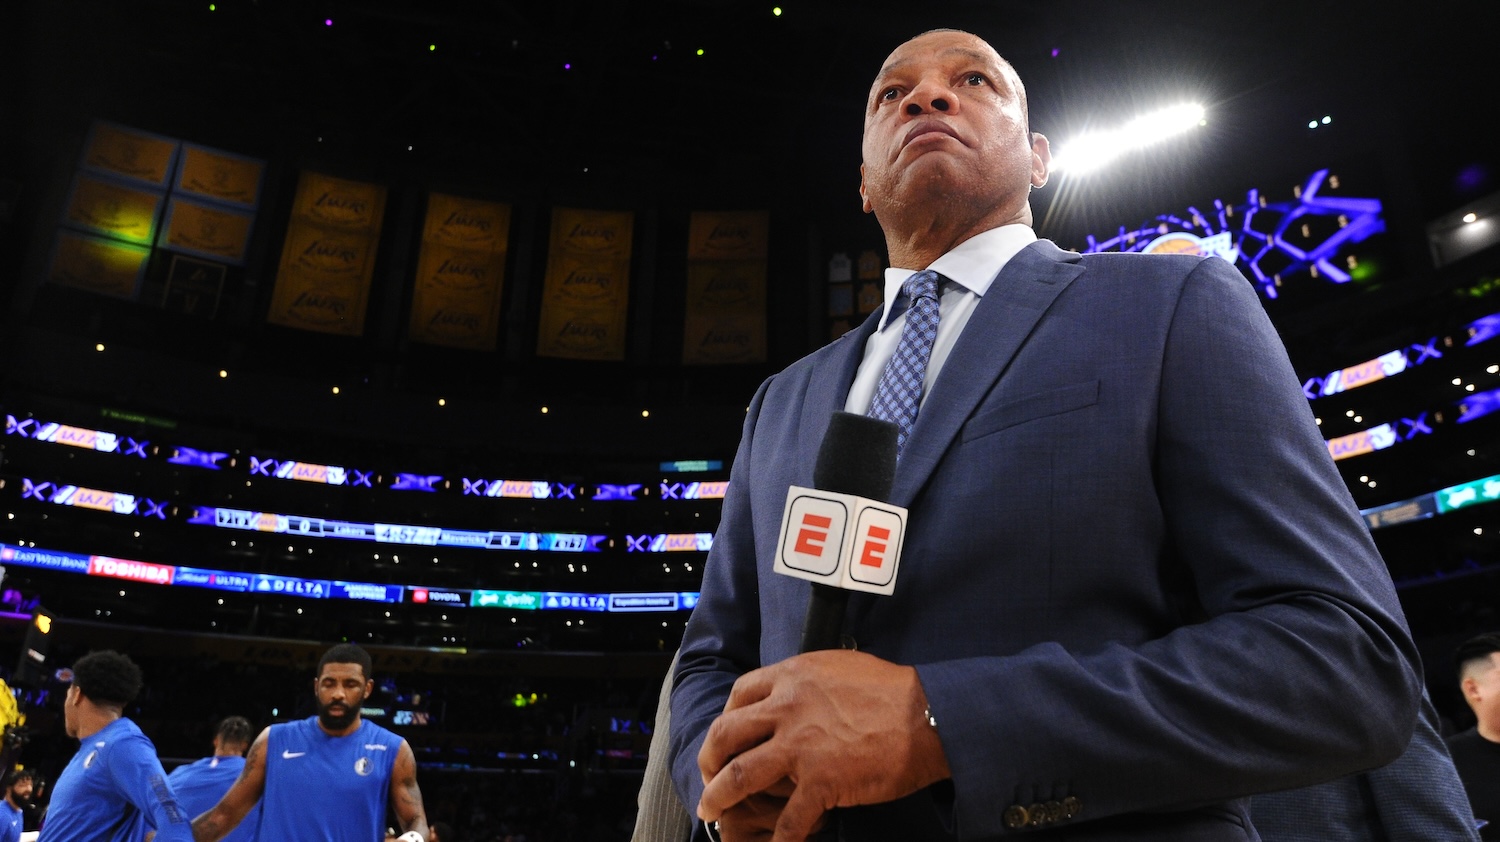 LOS ANGELES, CA - JANUARY 17: Doc Rivers looks on before the Dallas Mavericks vs Los Angeles Lakers game on January 17, 2024 at Crypto.Com Arena in Los Angeles, California. NOTE TO USER: User expressly acknowledges and agrees that, by downloading and/or using this Photograph, user is consenting to the terms and conditions of the Getty Images License Agreement. Mandatory Copyright Notice: Copyright 2024 NBAE (Photo by Andrew D. Bernstein/NBAE via Getty Images)